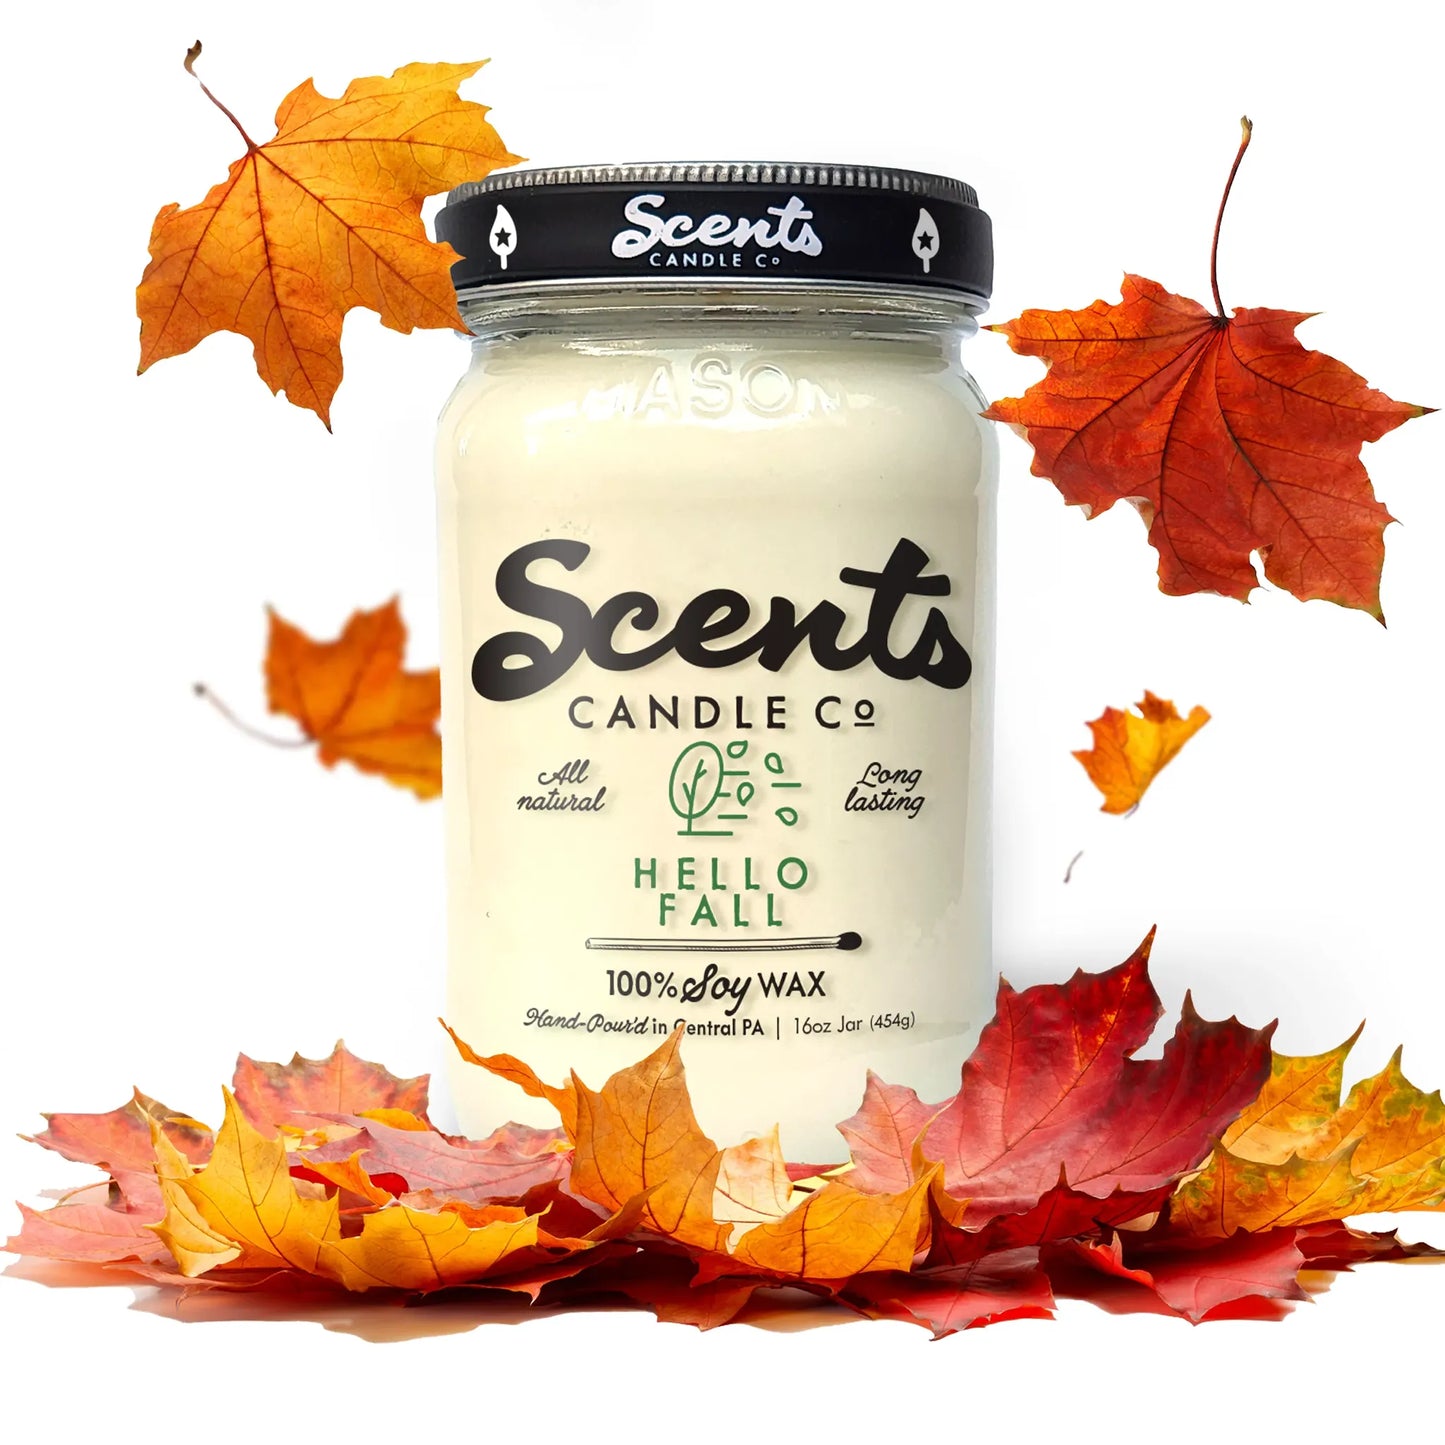 Scents Candle Co. Hello Fall Soy Wax Candles